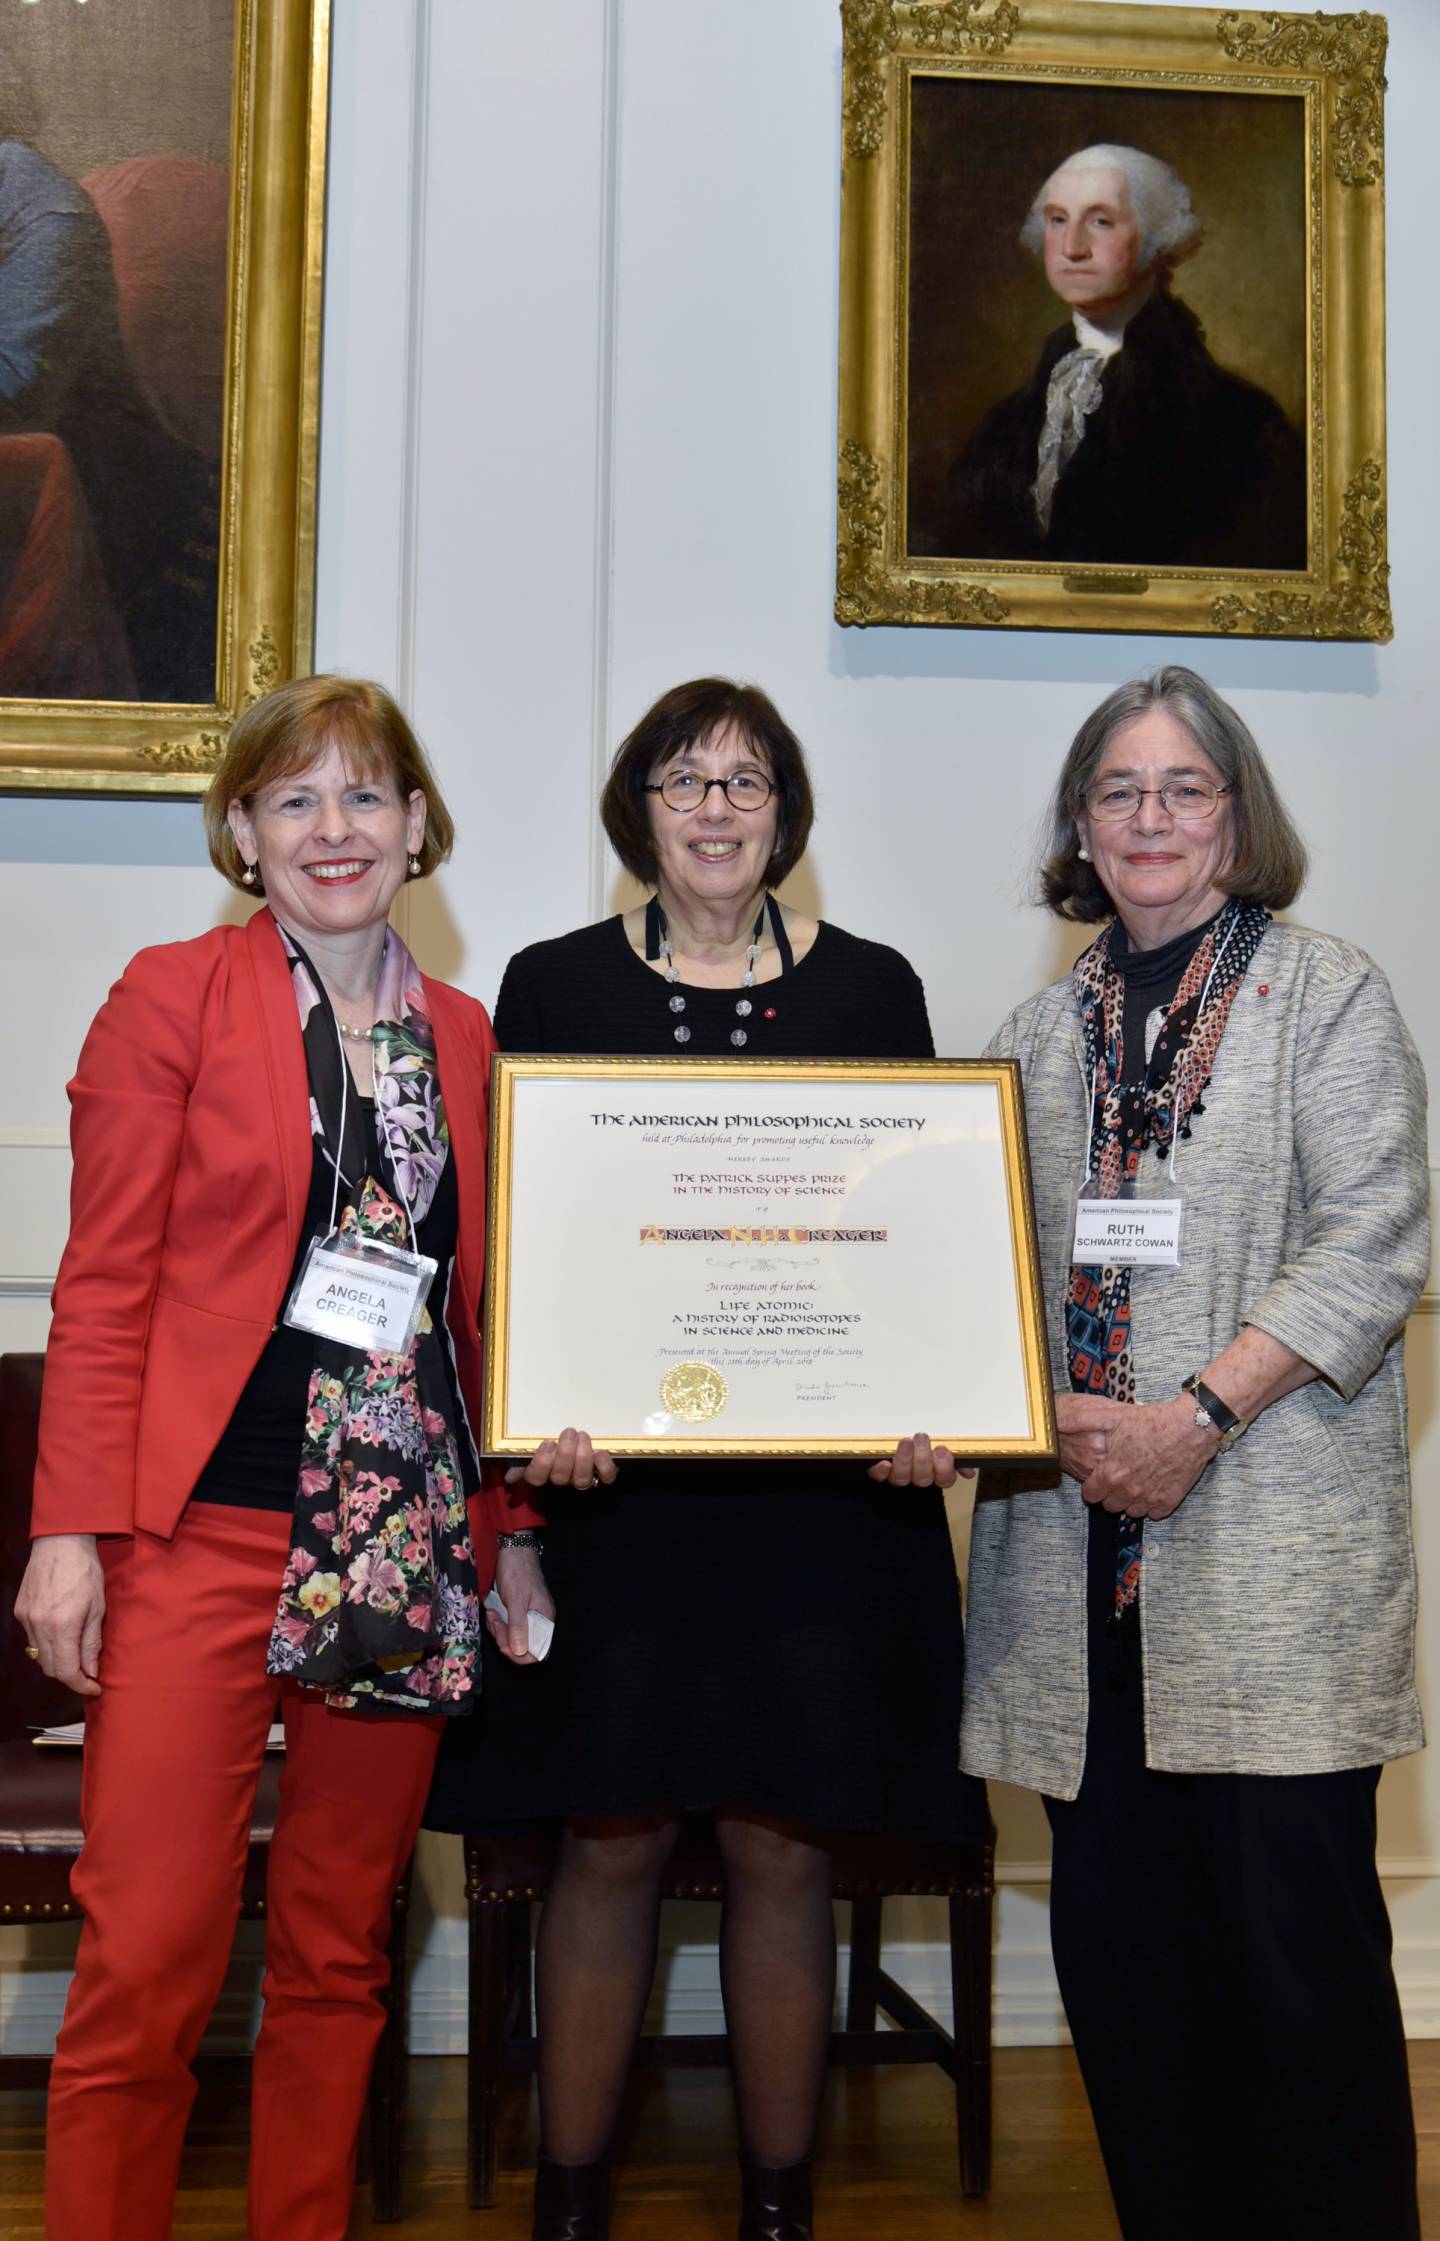 from left: Creager; Linda Greenhouse, president of the American Philosophical Society; and Ruth Schwartz Cowan, chair of the prize committee.